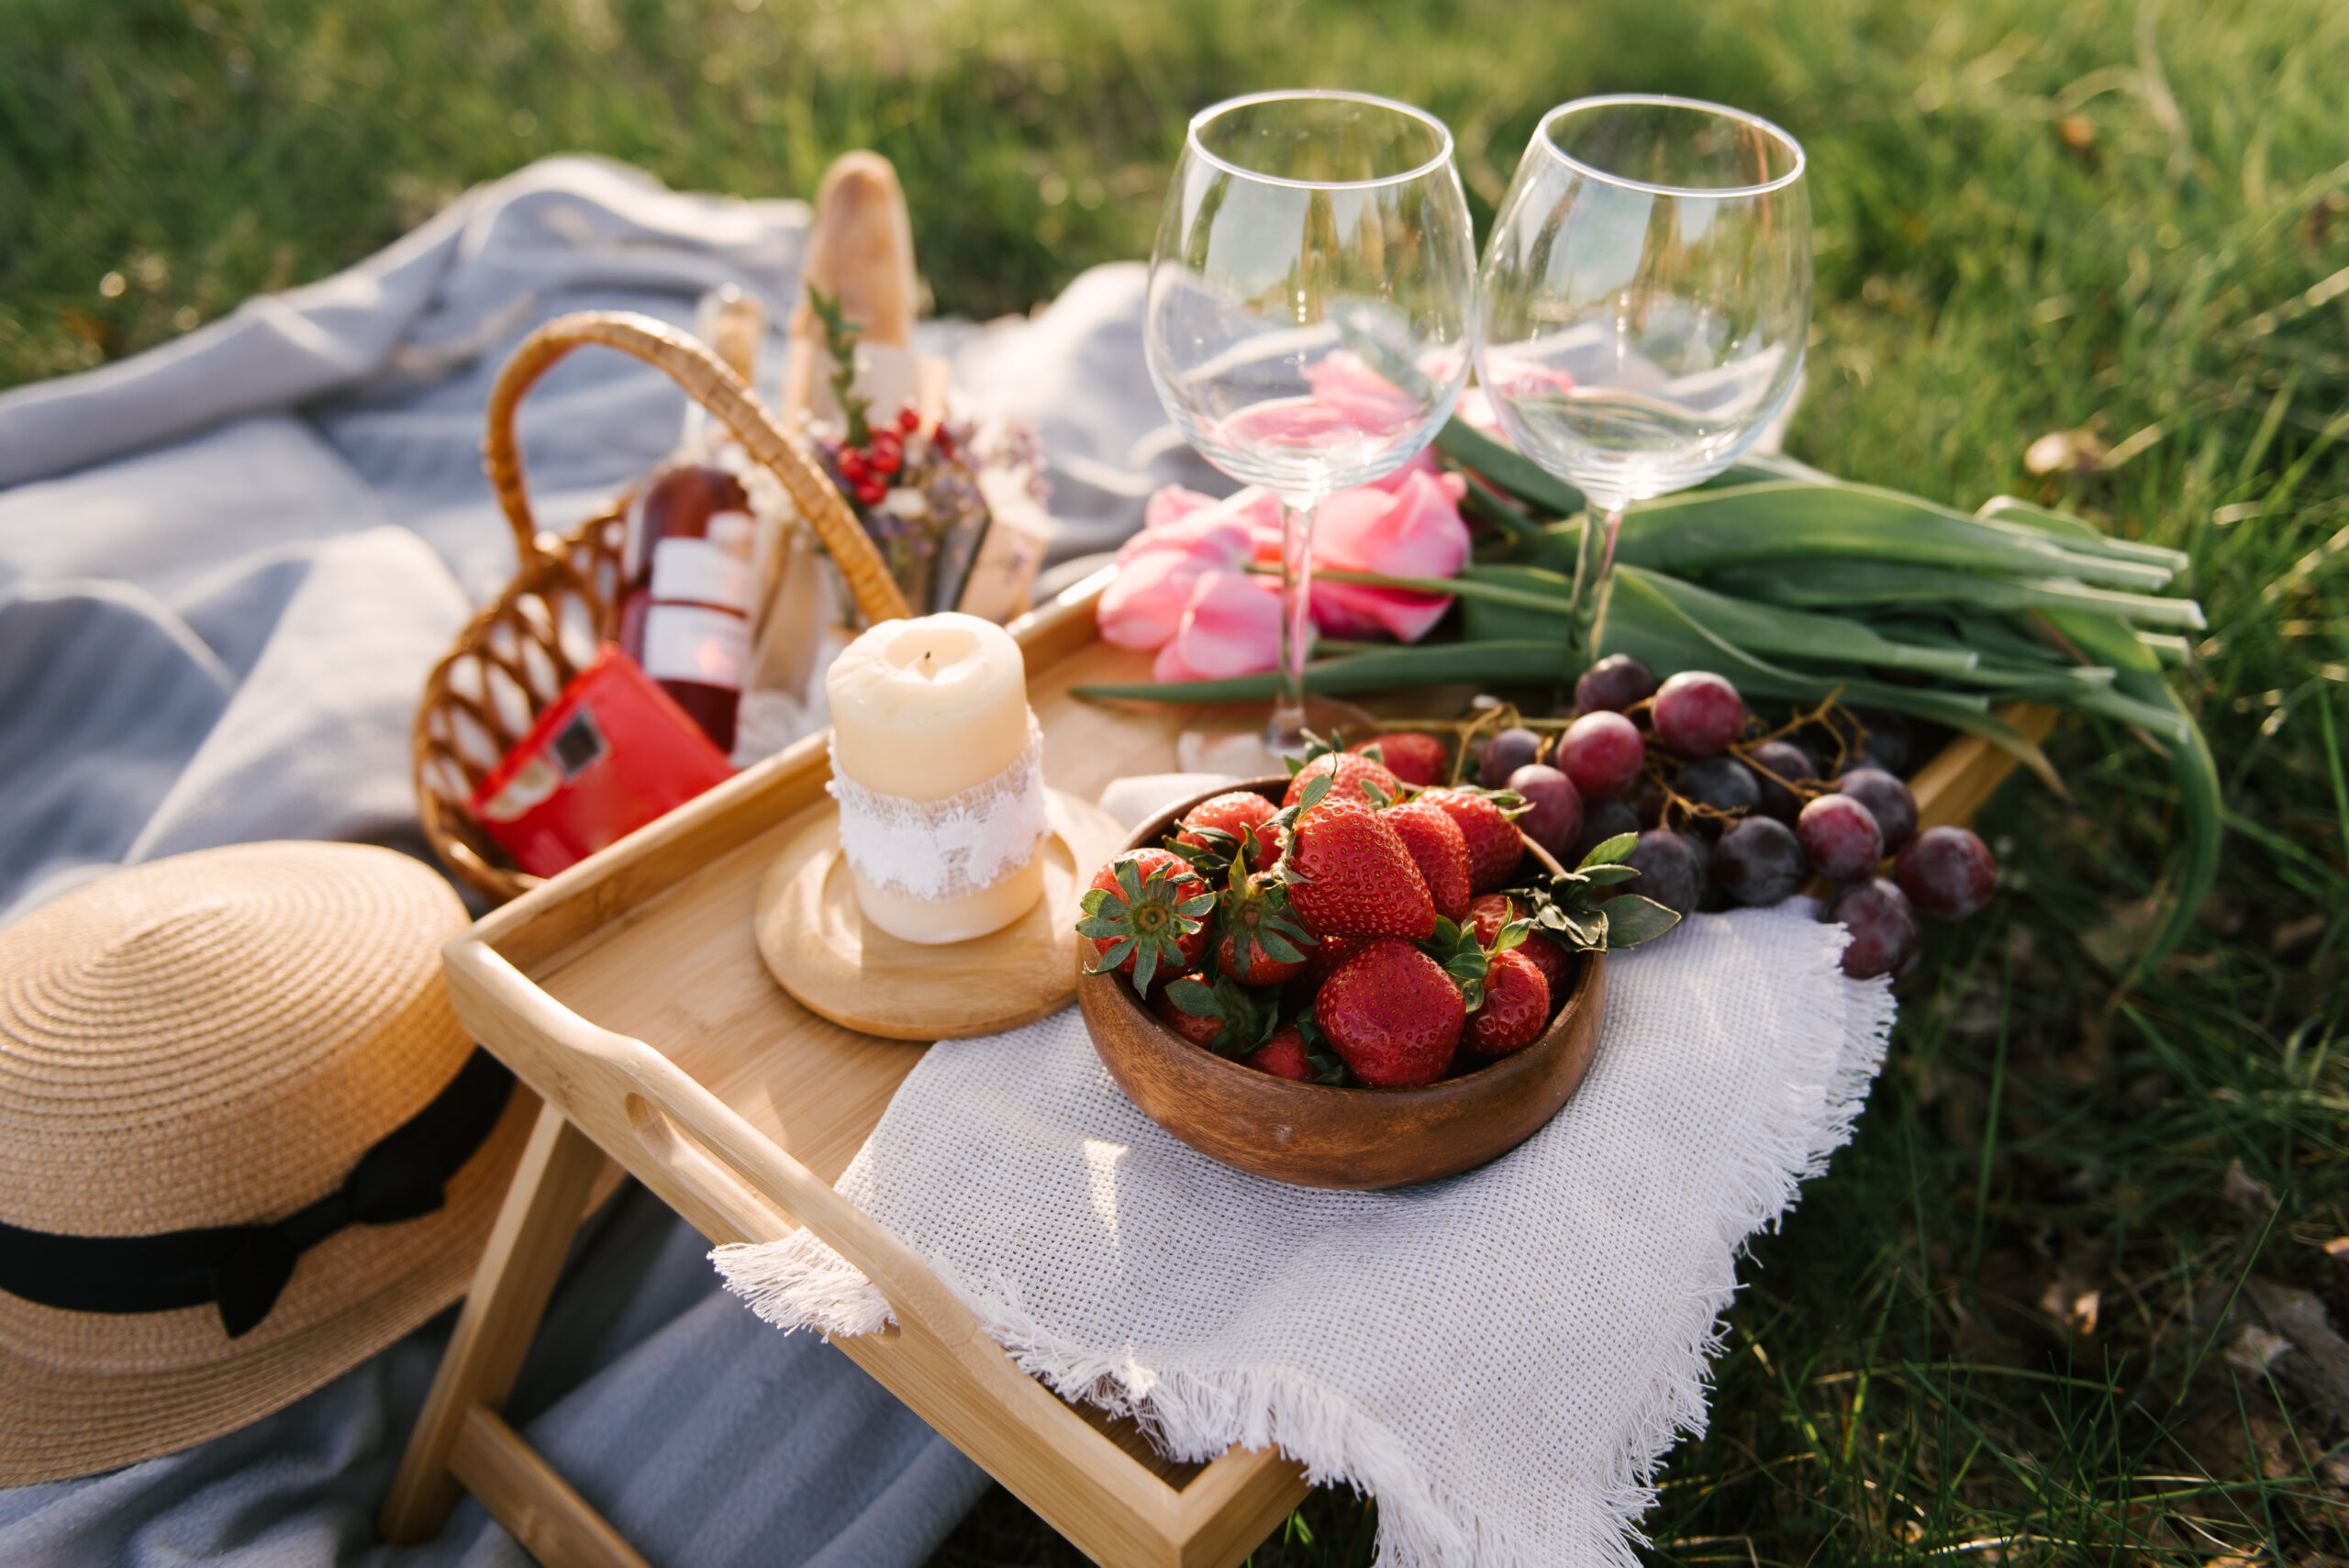 Picnic basket with strawberries, grapes and buns on the green grass in the garden